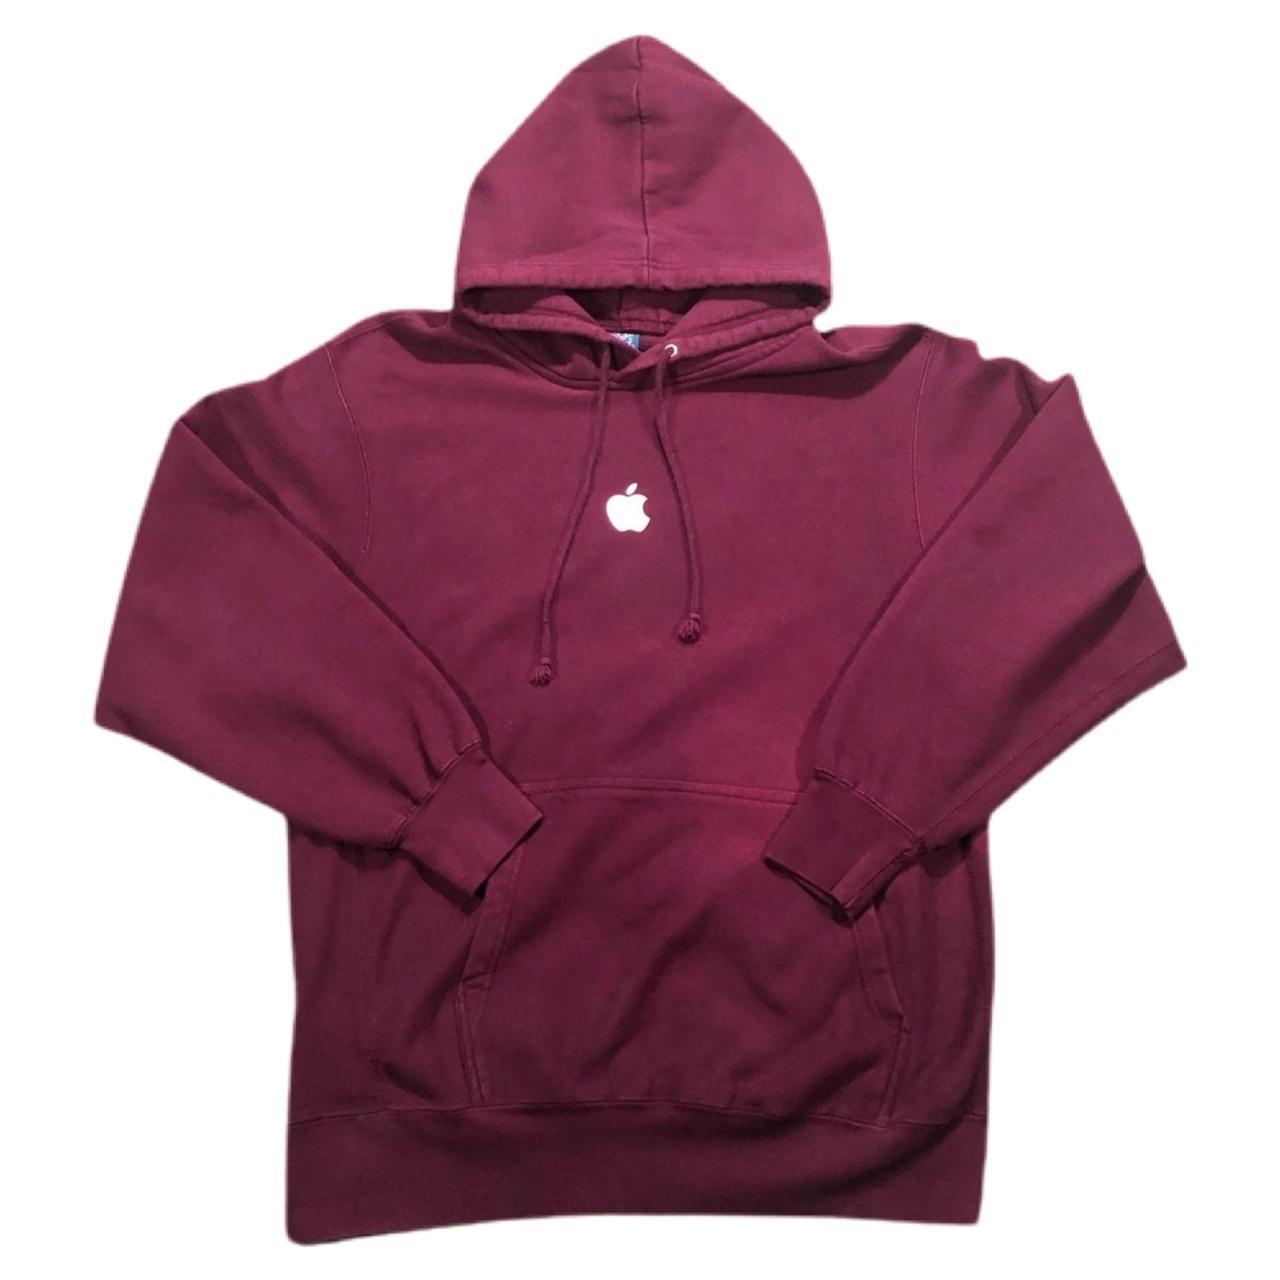 Product Image 1 - Vintage Apple hoodie. Some discoloring